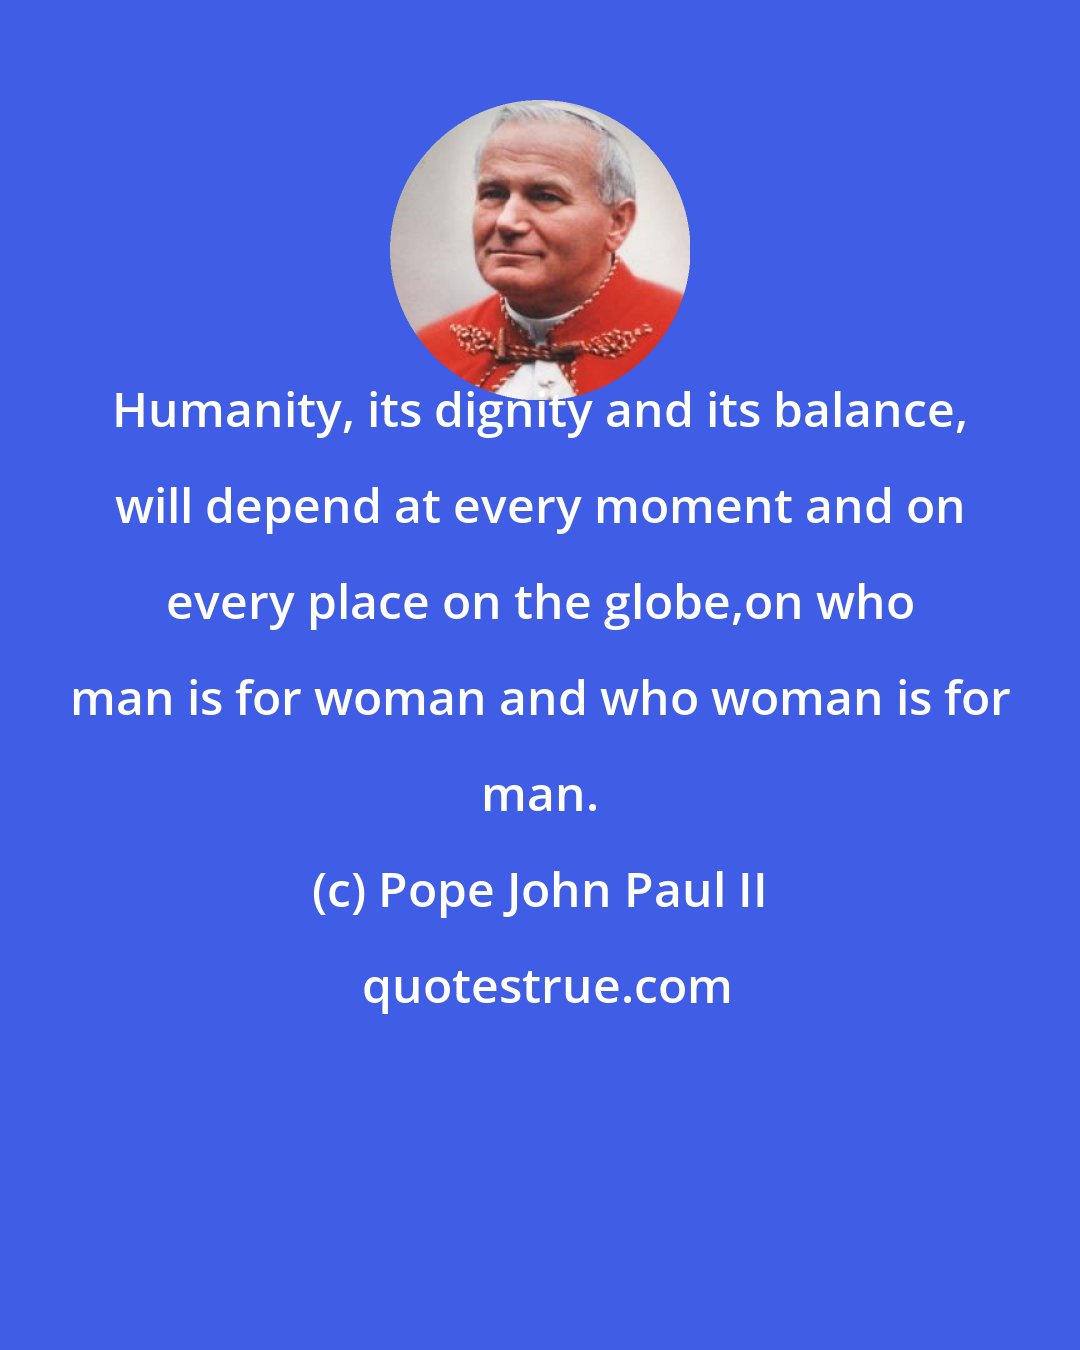 Pope John Paul II: Humanity, its dignity and its balance, will depend at every moment and on every place on the globe,on who man is for woman and who woman is for man.